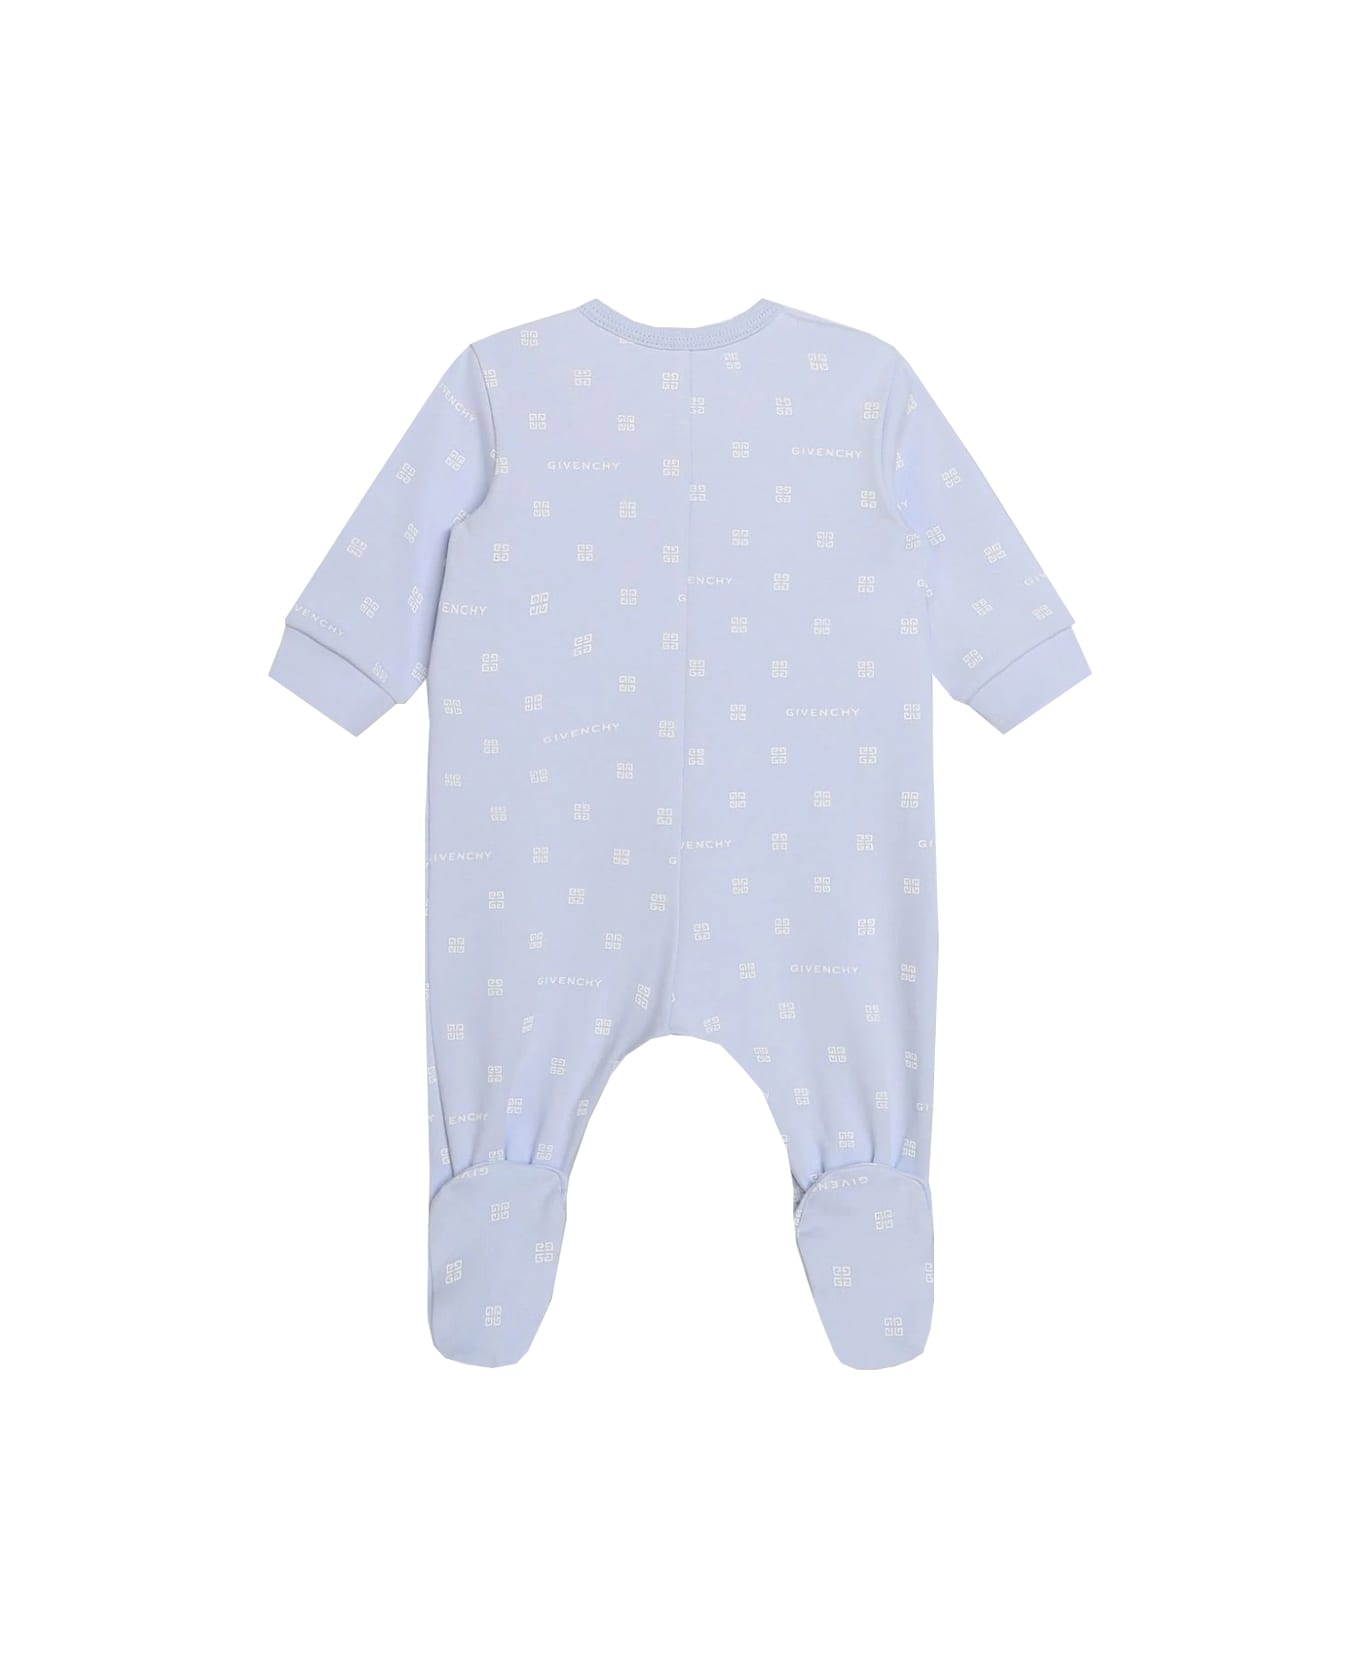 Givenchy Romper With Print - Light blue ボディスーツ＆セットアップ